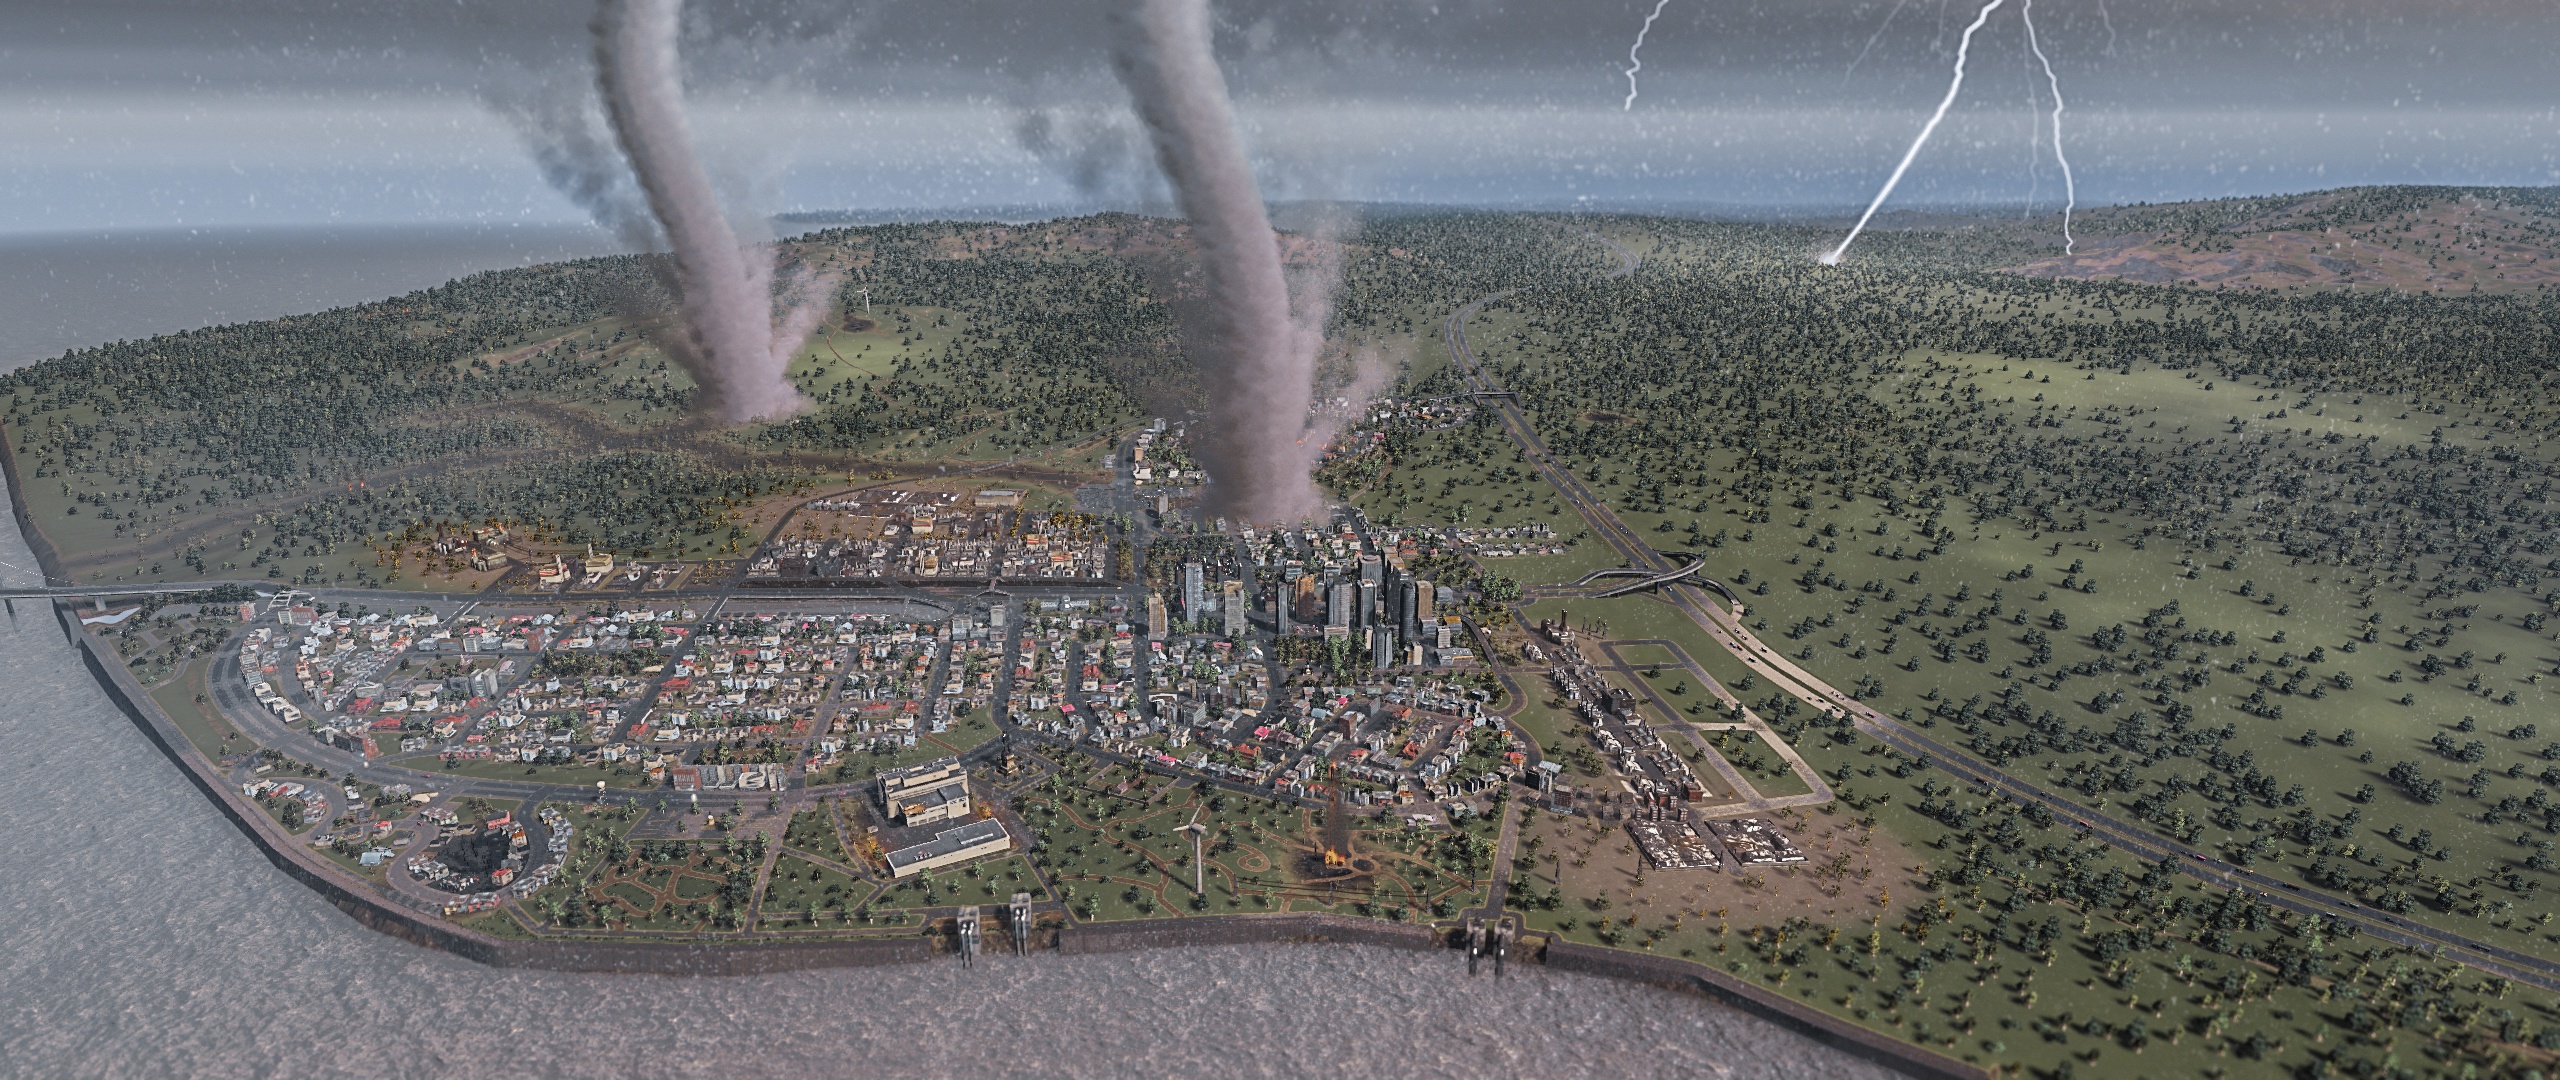 City naturals. Natural Disasters Сити Скайлайн. Сити Скайлайн катастрофы. Cities Skylines natural Disasters. Cities Skylines метеорит.